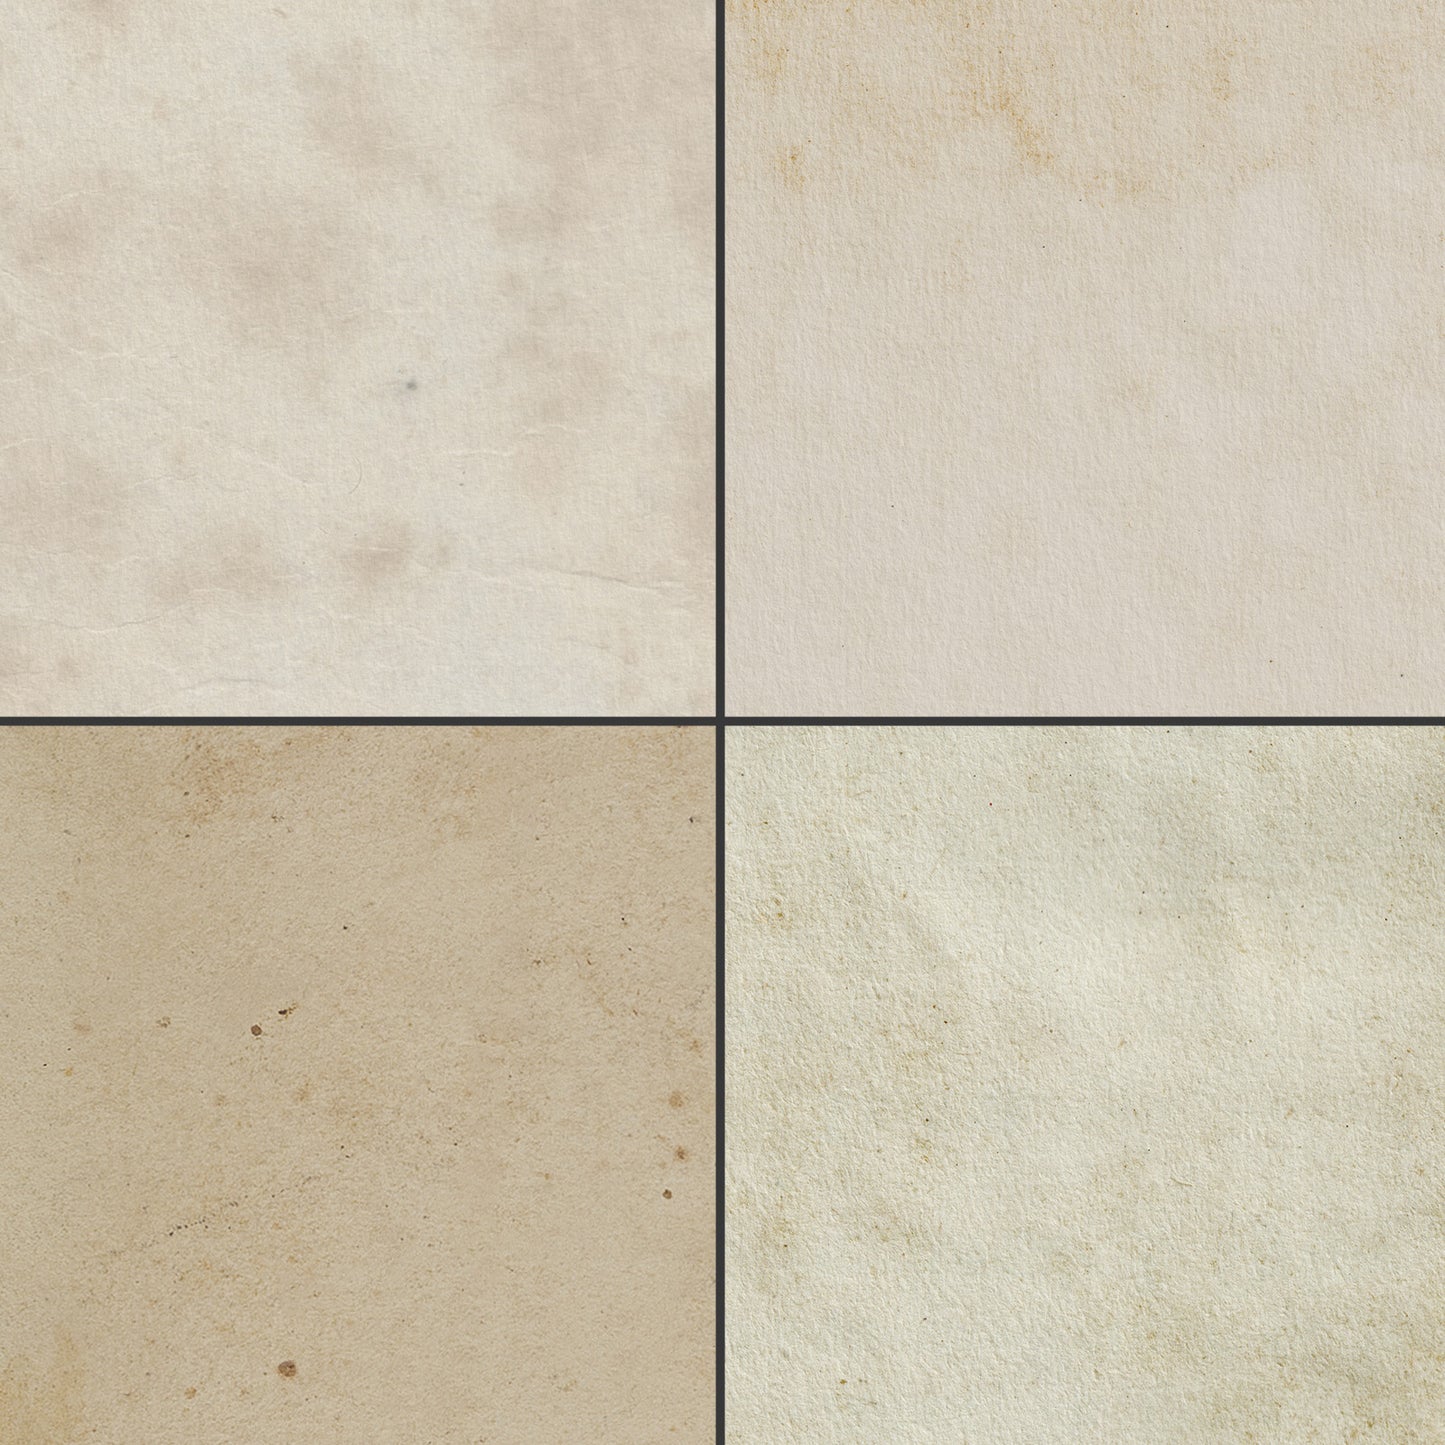 8 FREE Aged Paper Textures